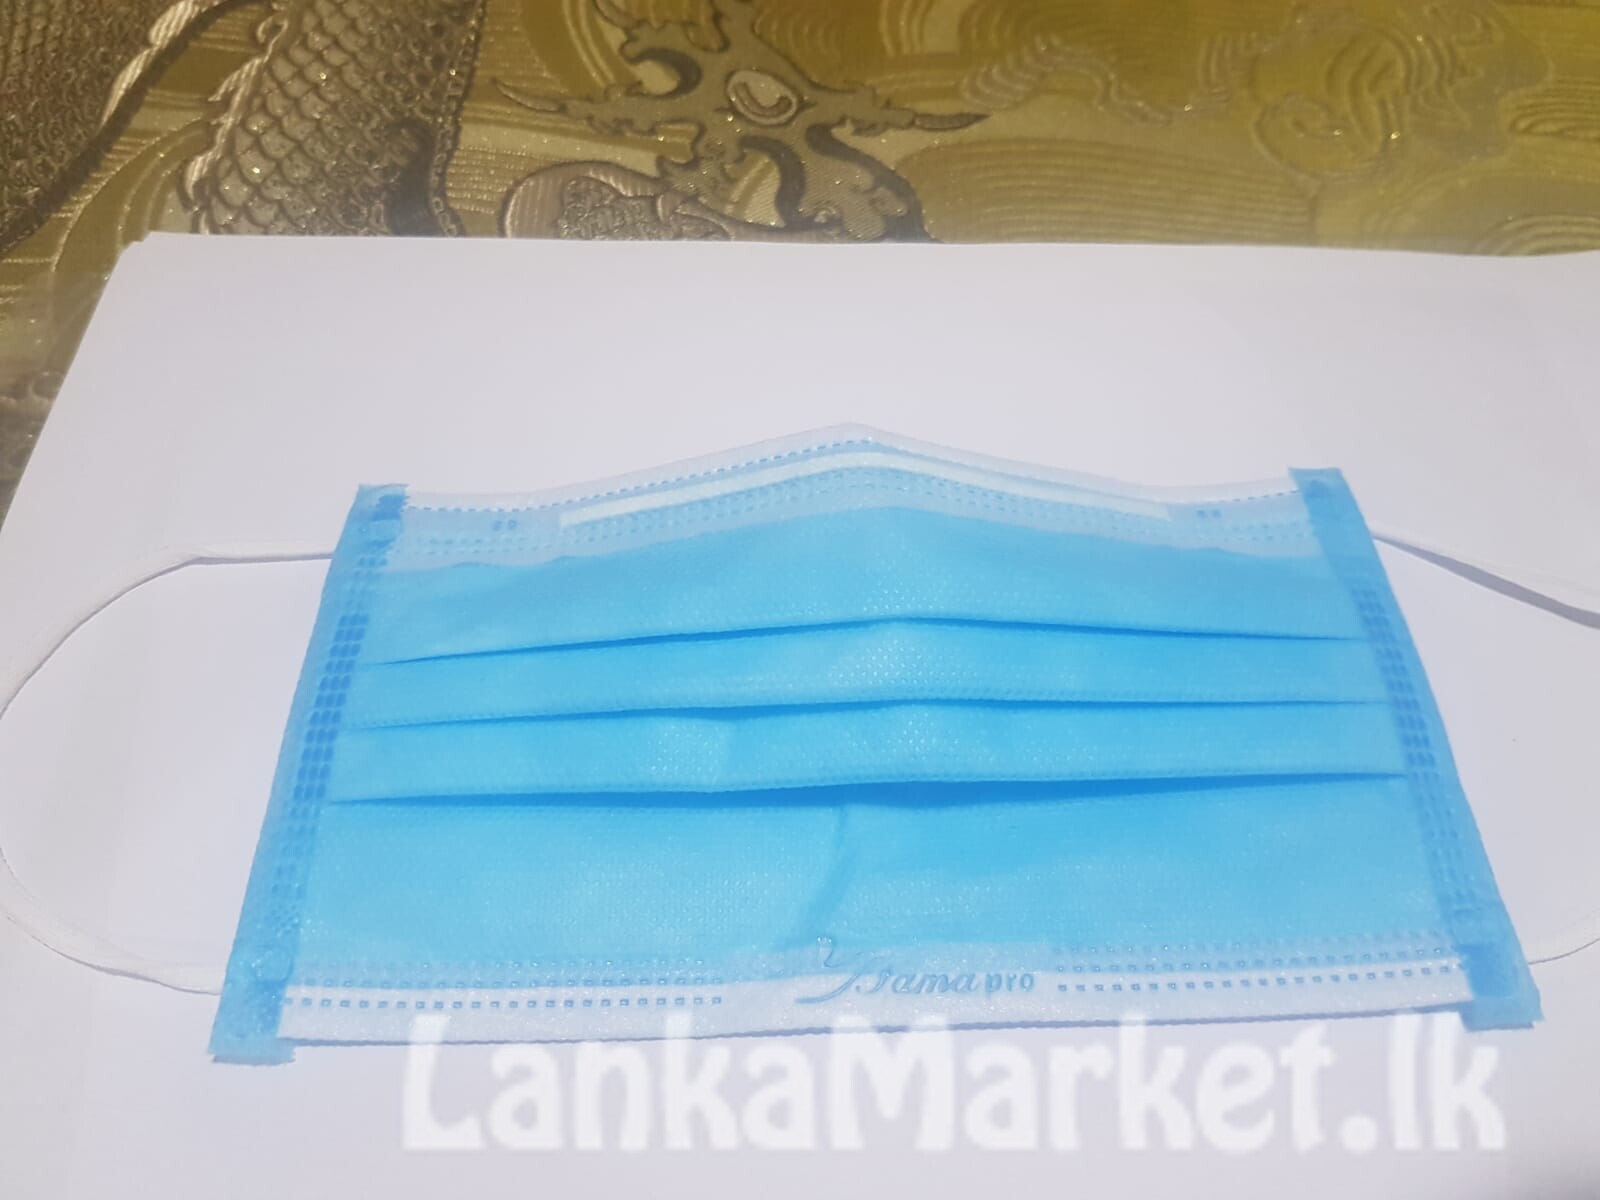 3 Million 3ply Chinese Imported Masks Available For 17.5rs Per Mask